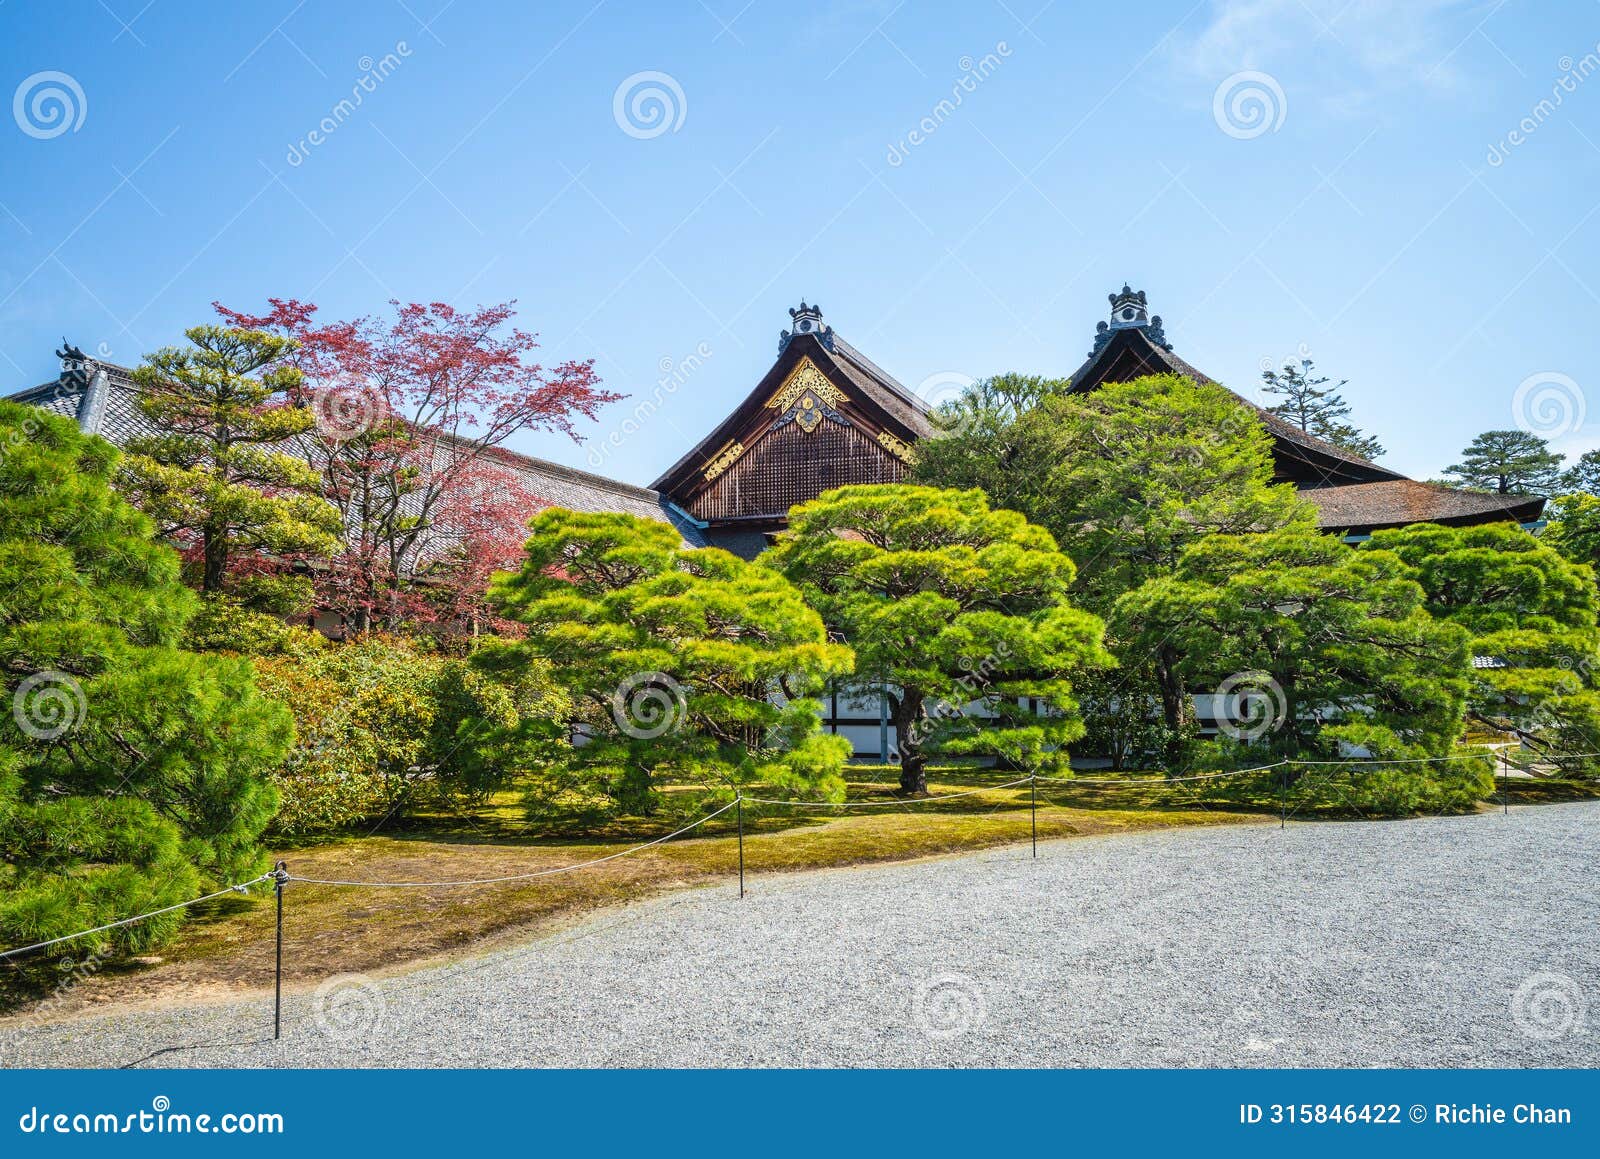 kyoto imperial palace, the former palace of the emperor of japan